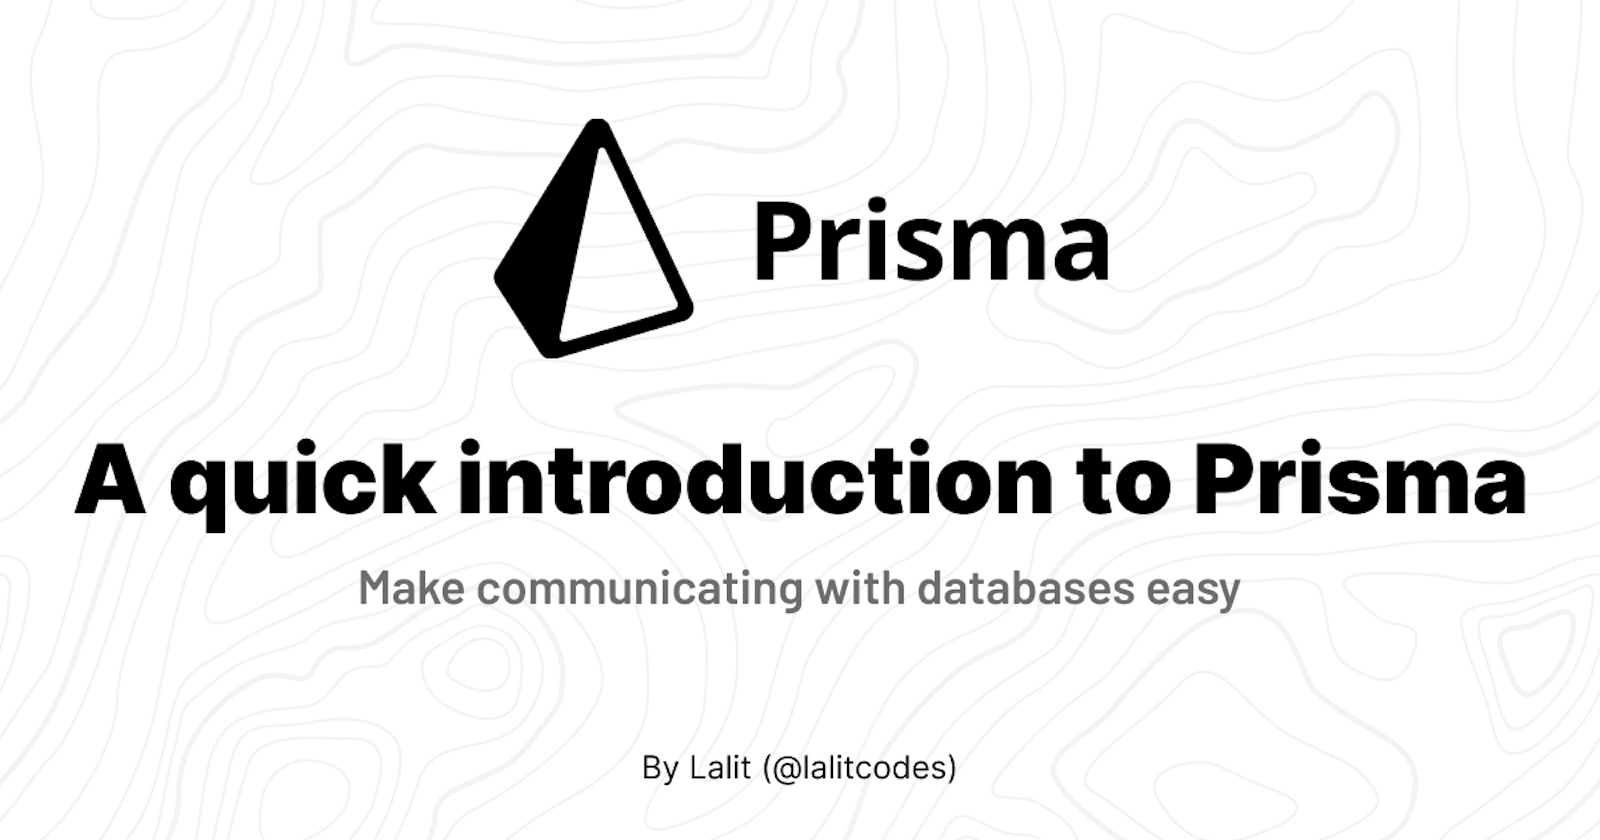 A quick introduction to Prisma